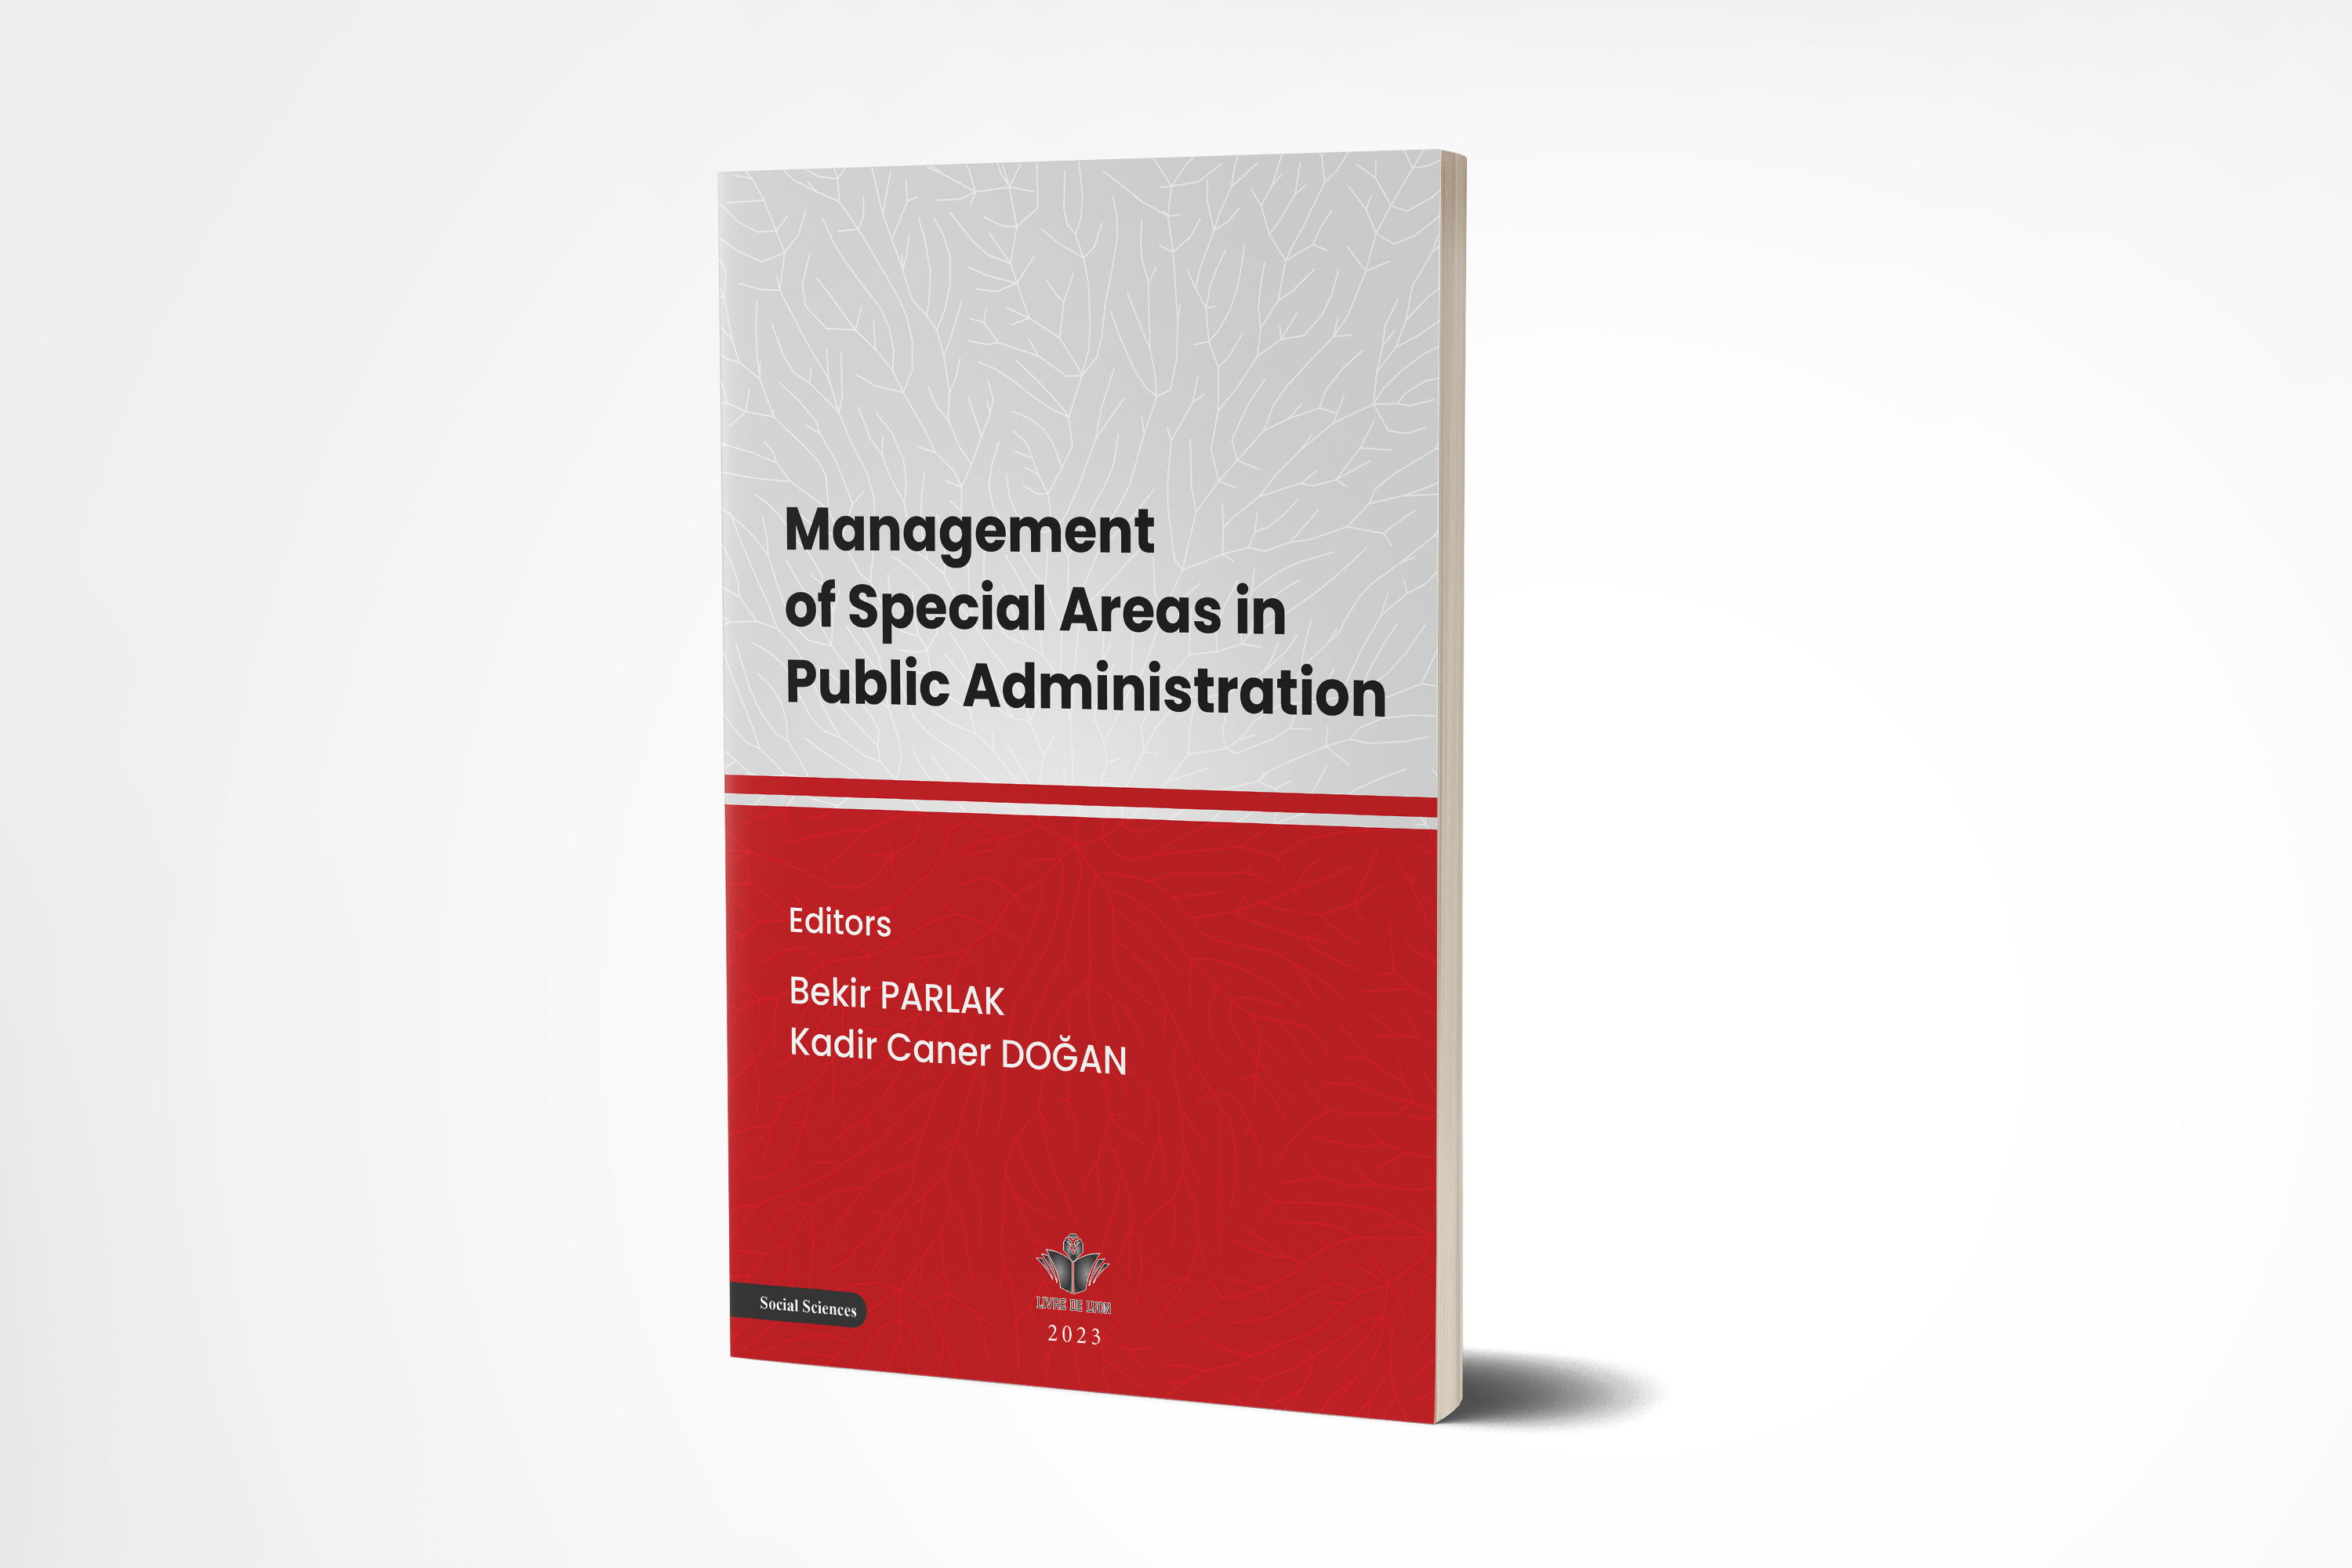 Management of Special Areas in Public Administration